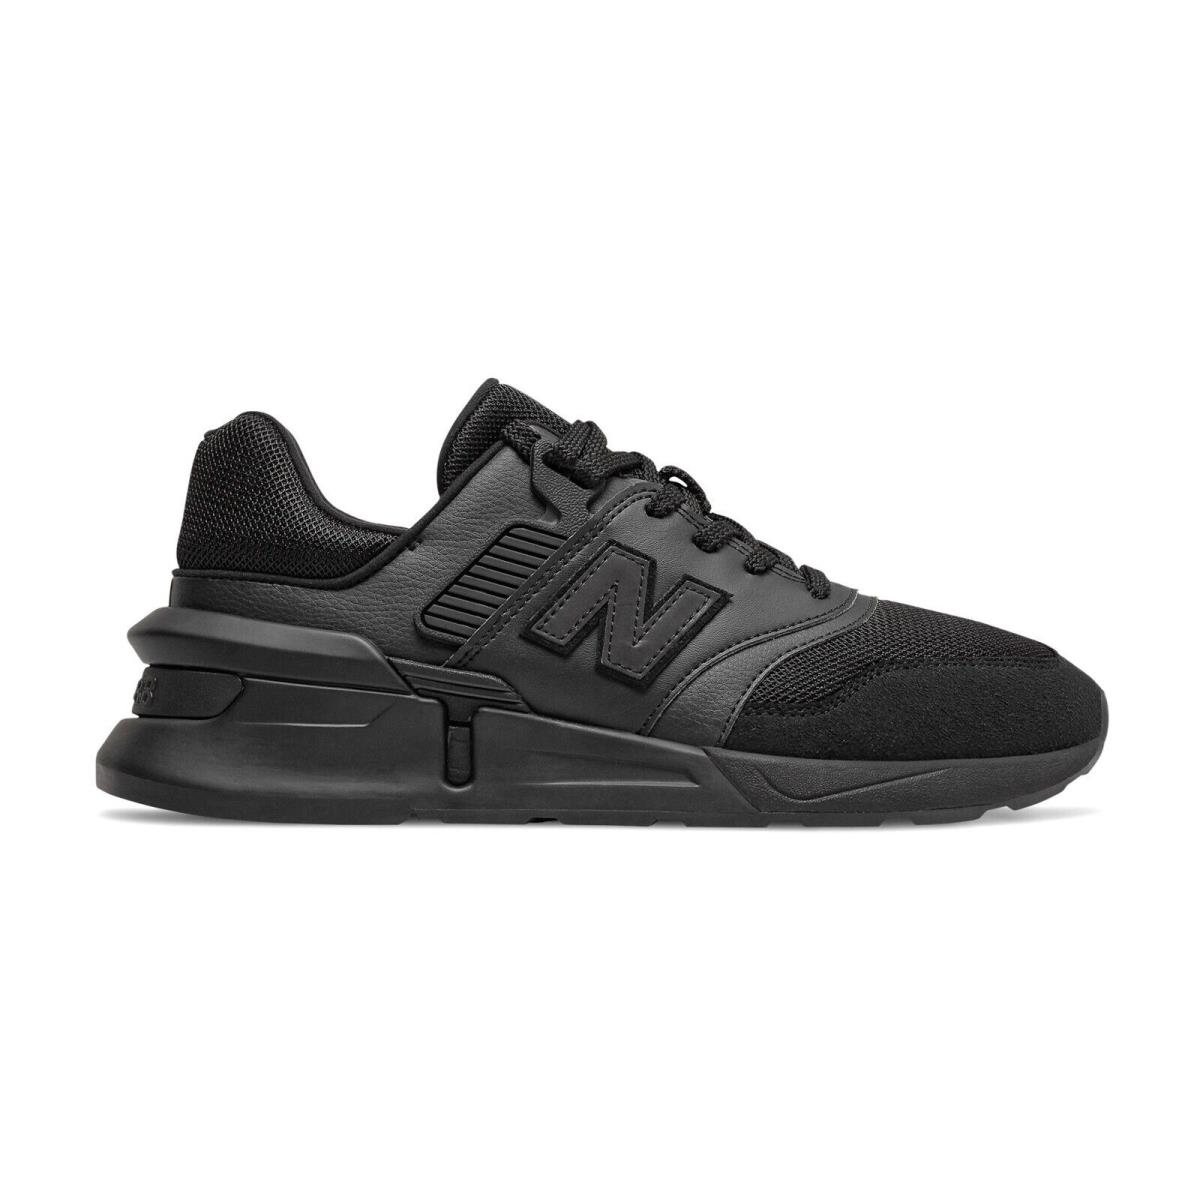 New Balance Men`s 997 Sport Running Shoes Sneakers MS997LOP - Black/black